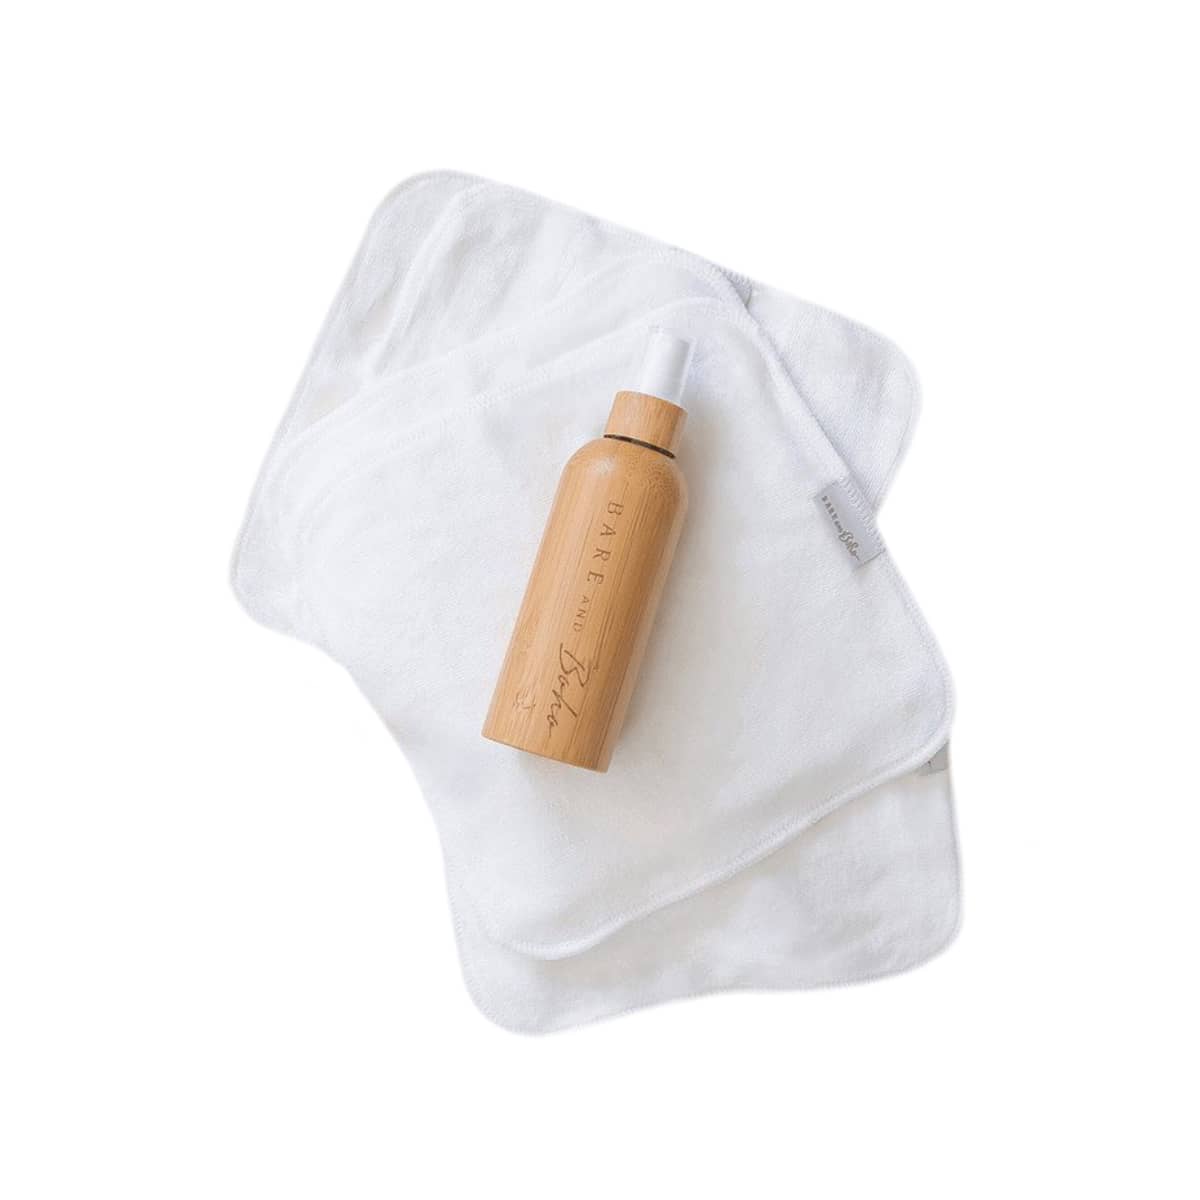 Bare and Boho Reusable Baby Wipes and Spray Bottle Bundle